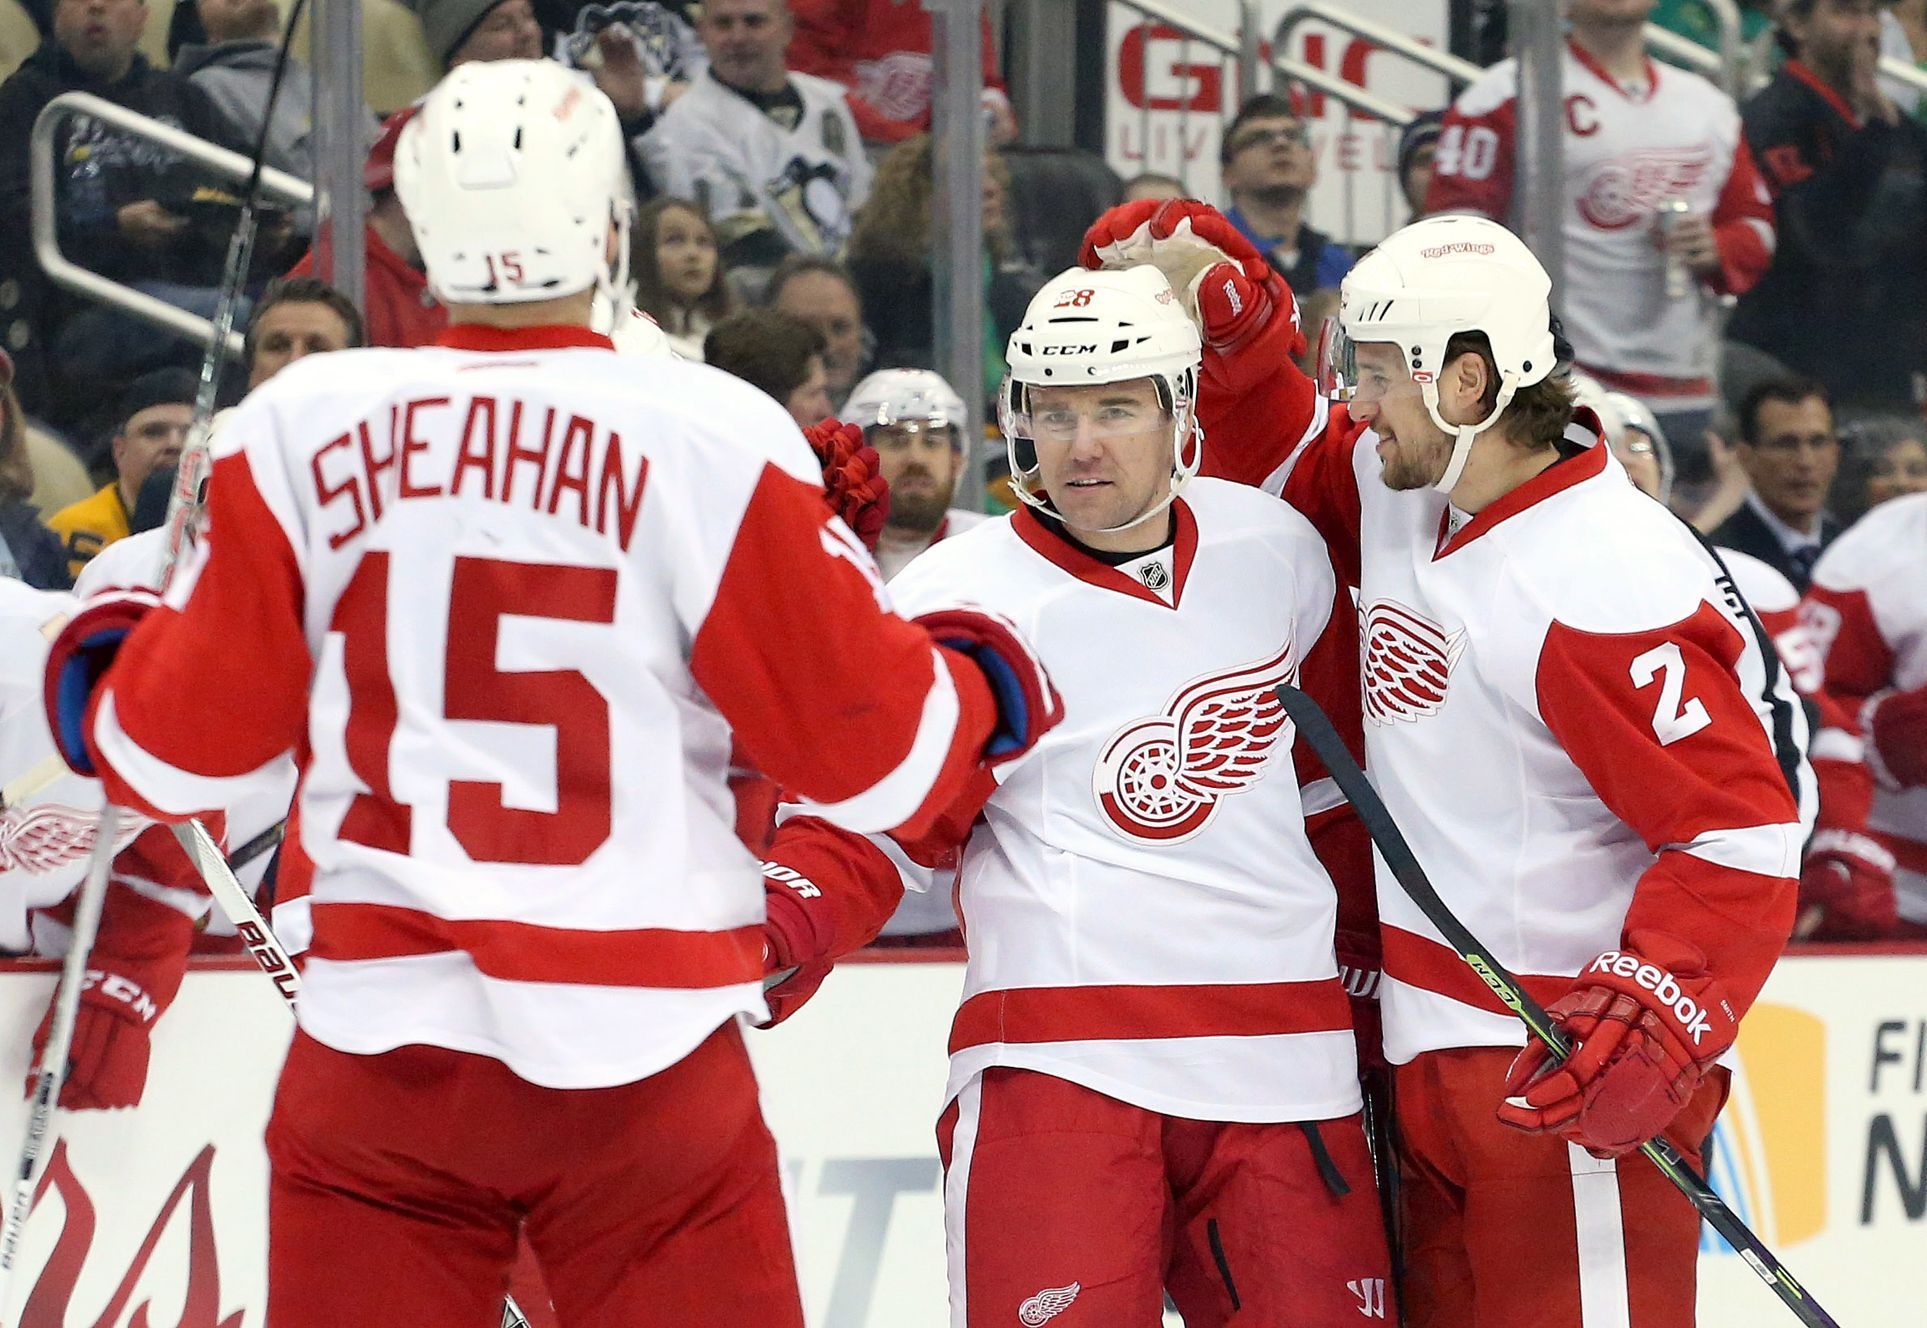 NHL: Detroit Red Wings at Pittsburgh Penguins (Sheahan, Židlický, Smith)